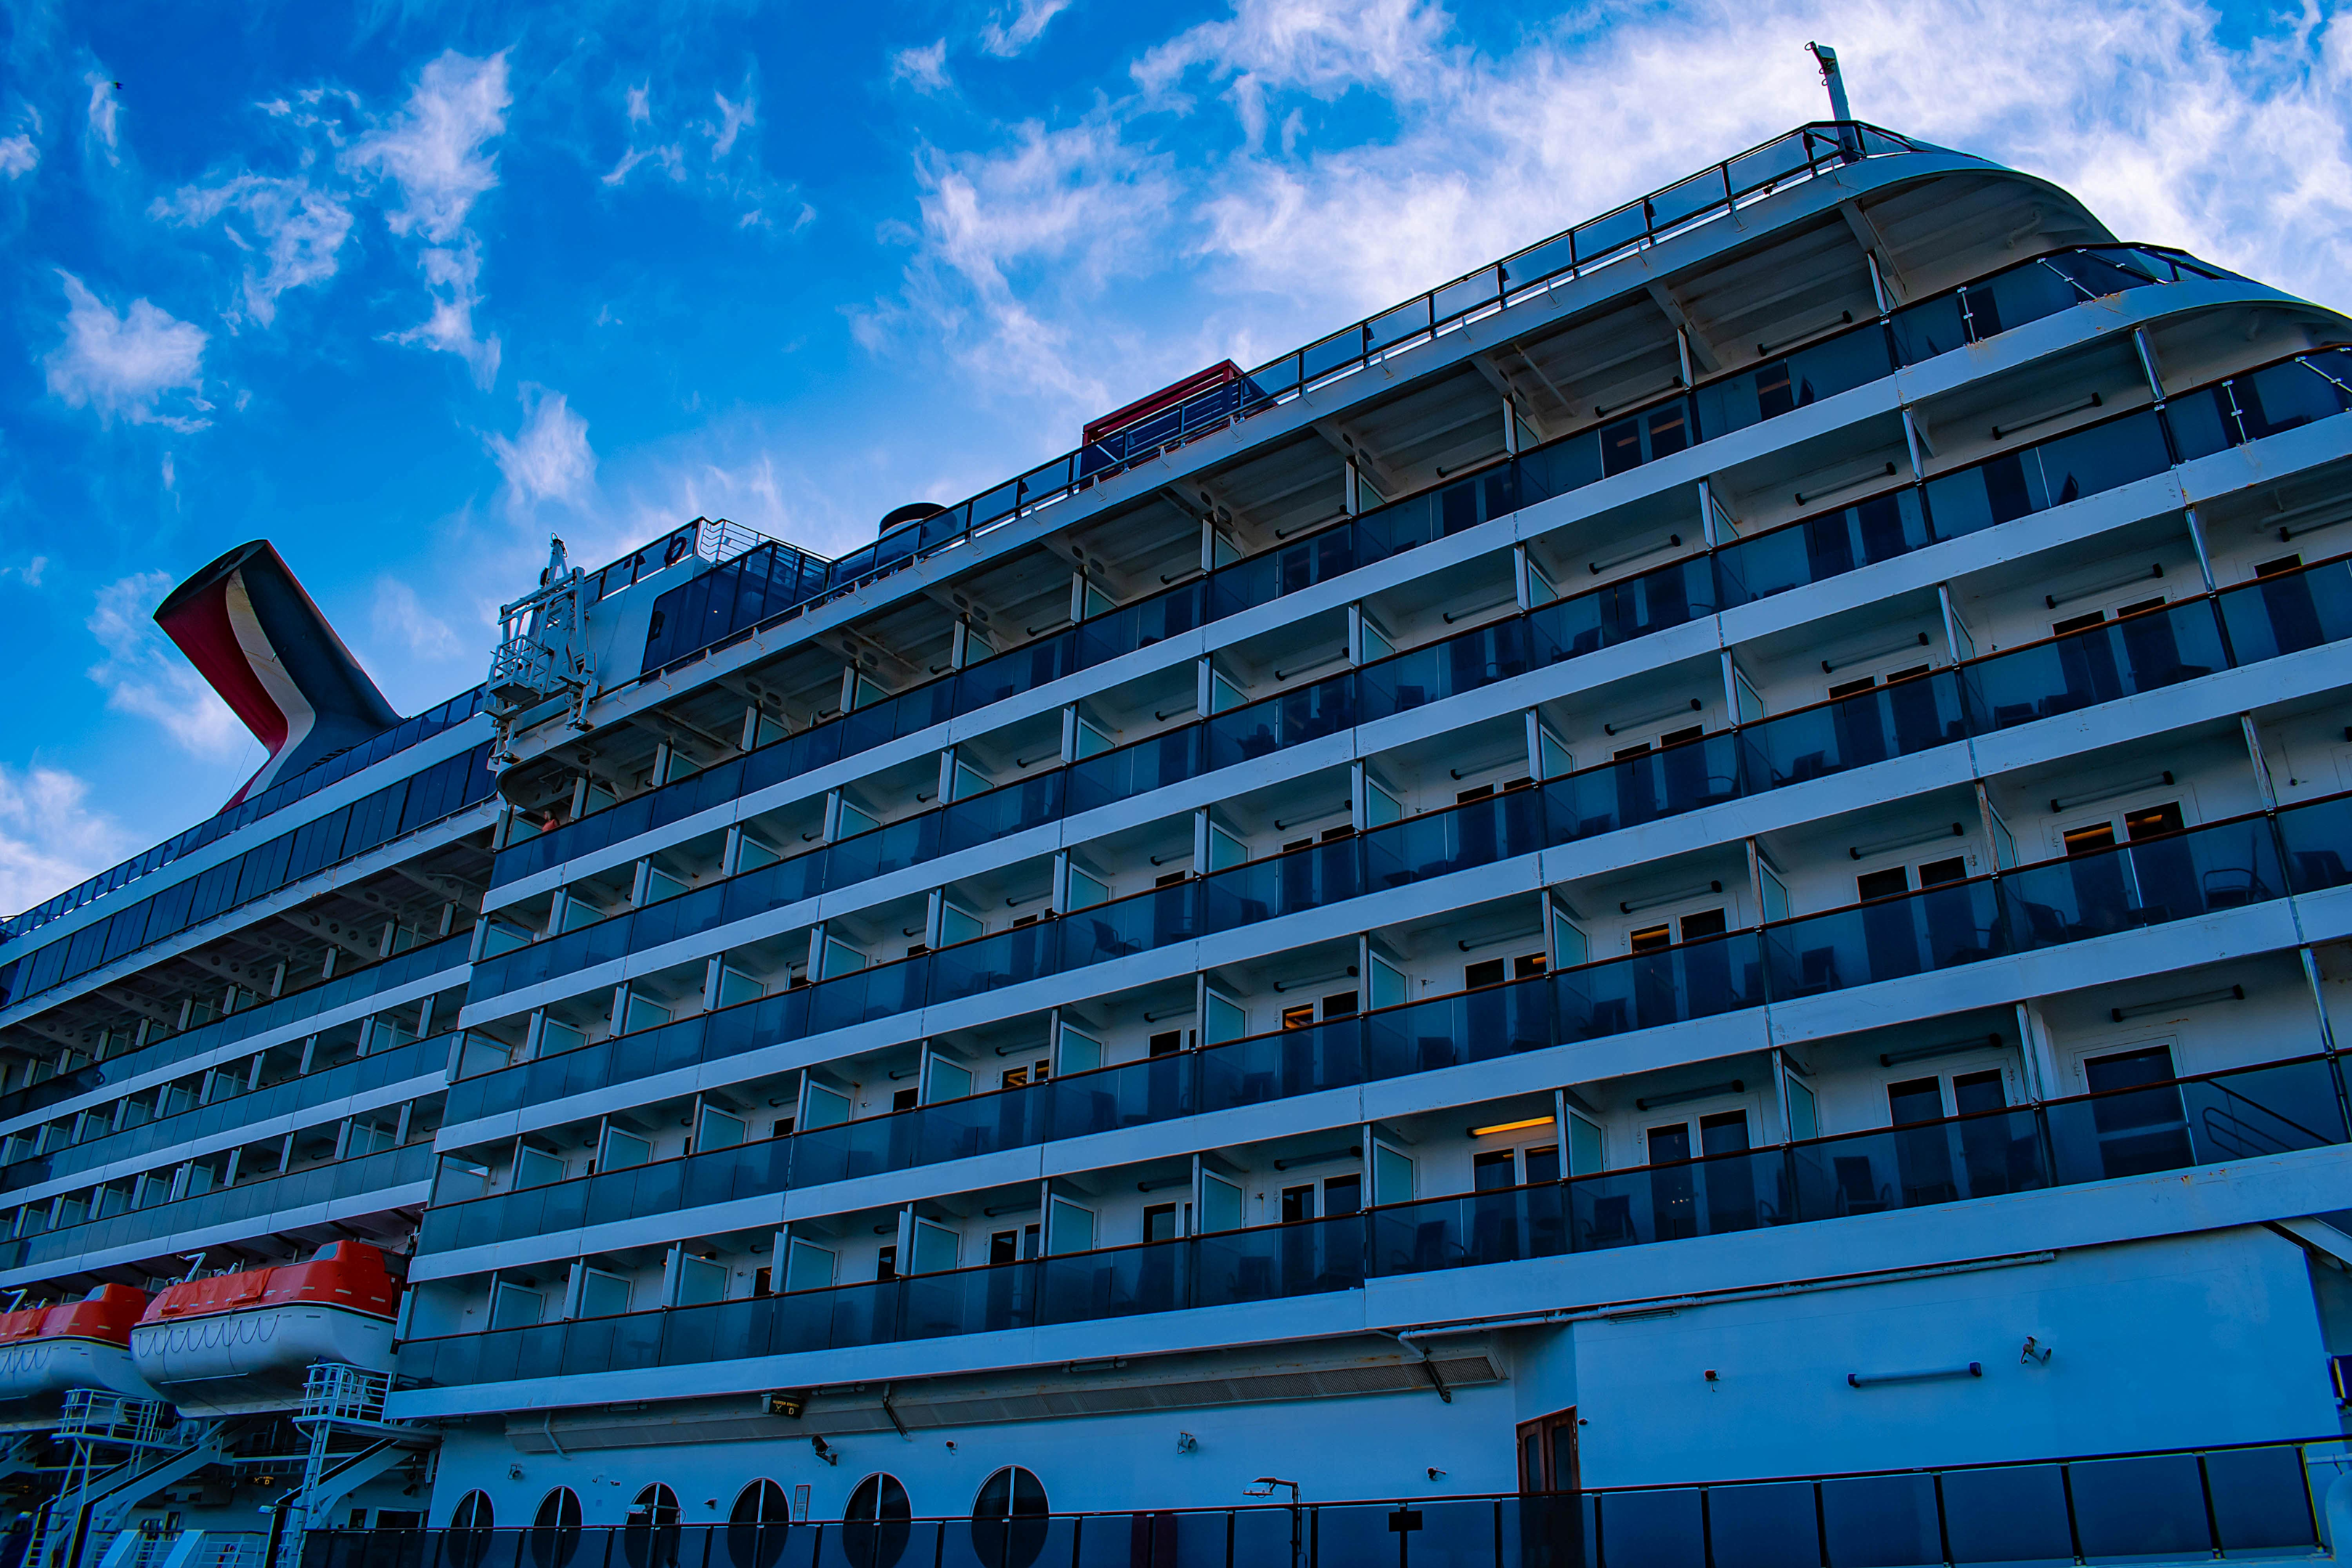 Cruise ship decks from a side view